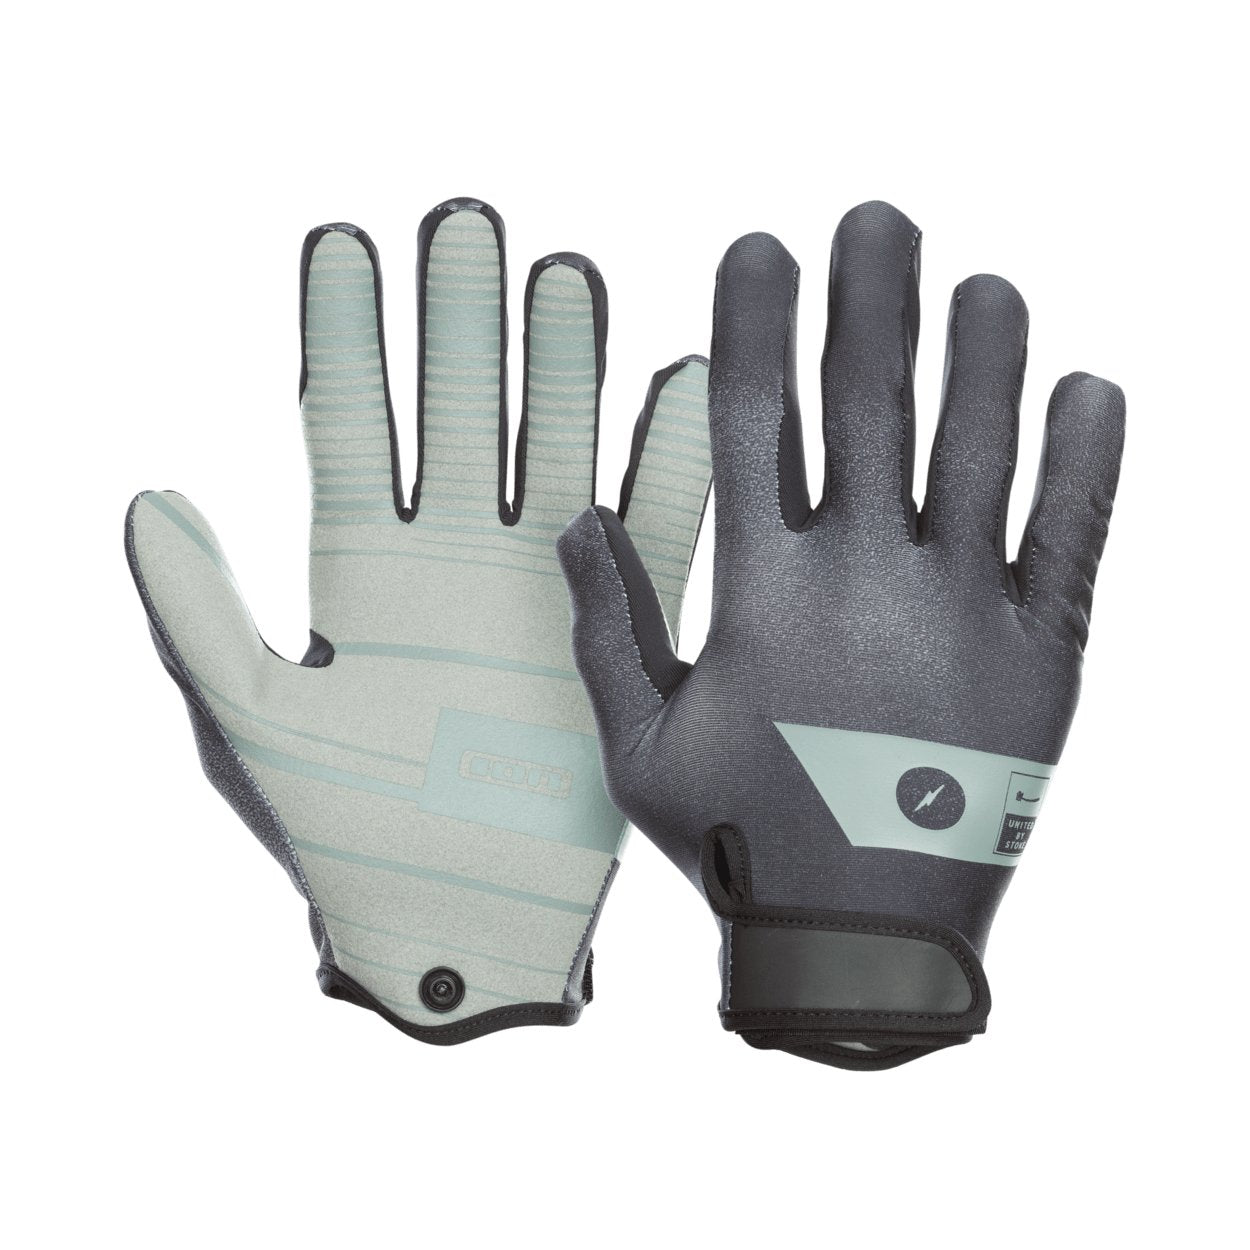 ION Amara Gloves Full Finger 2022 - Worthing Watersports - 9008415883318 - Neo Accessories - ION Water